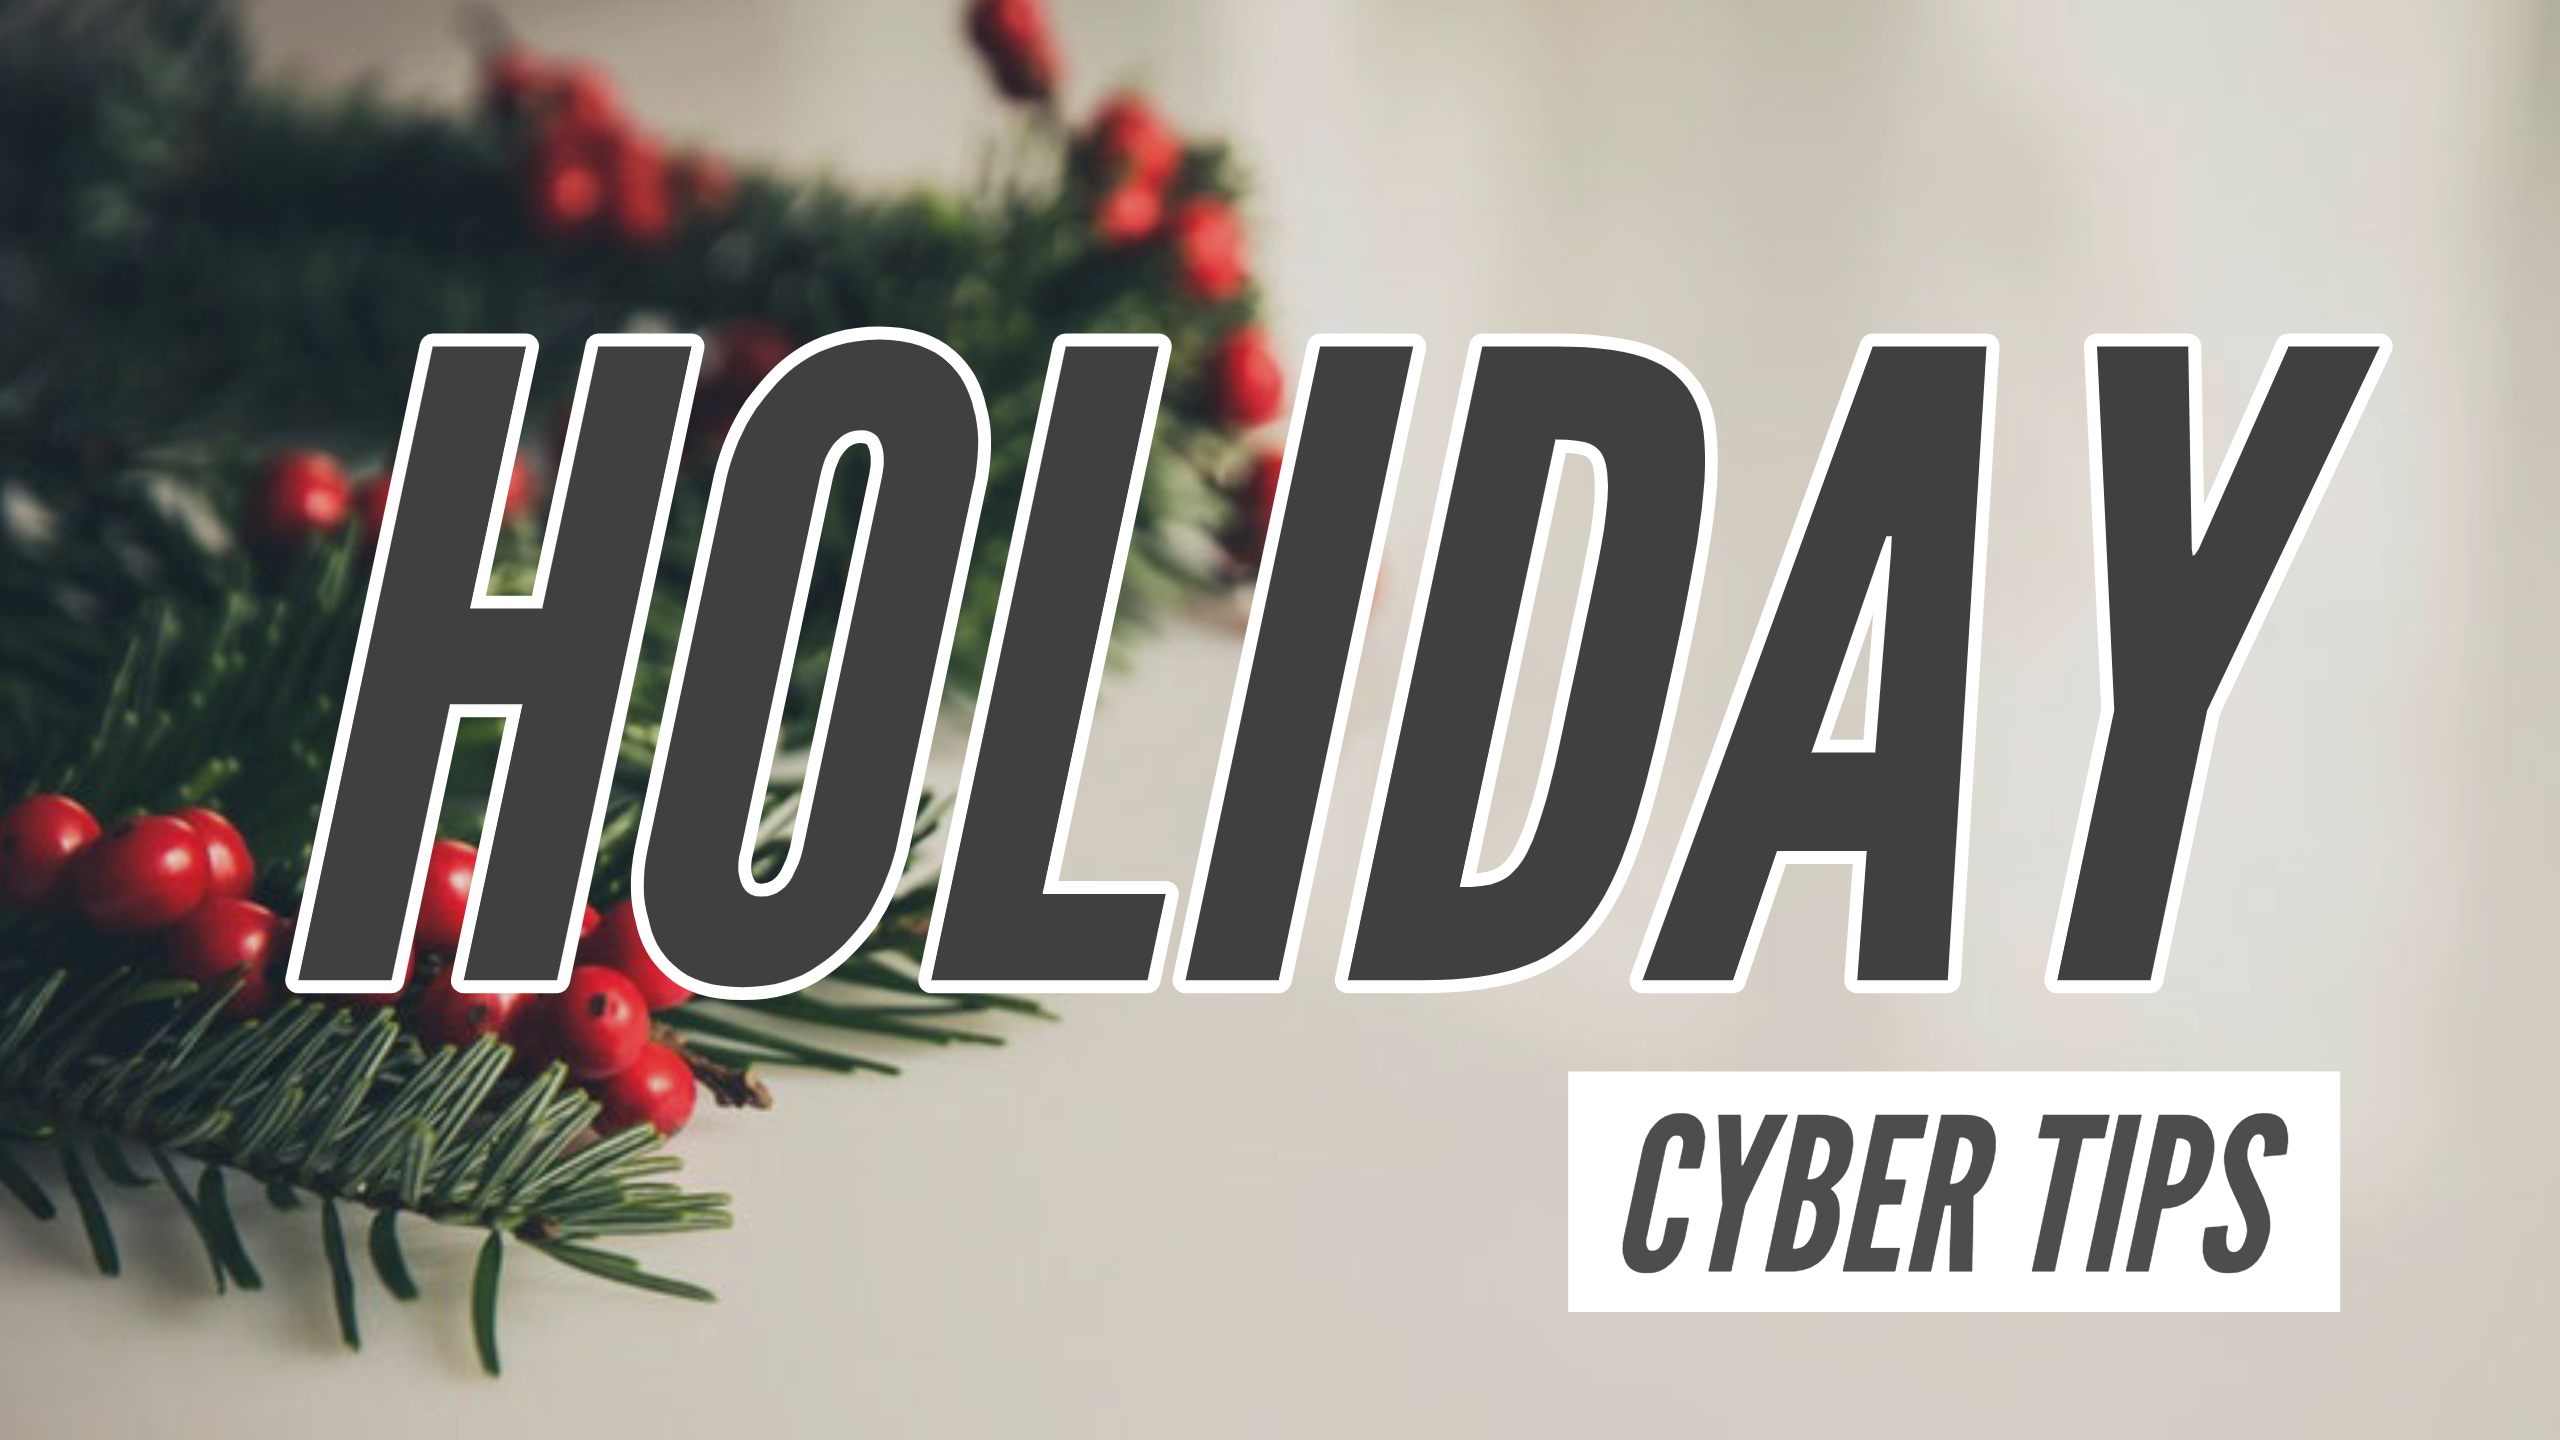 Stay Safe Online with Holiday Cyber Tips